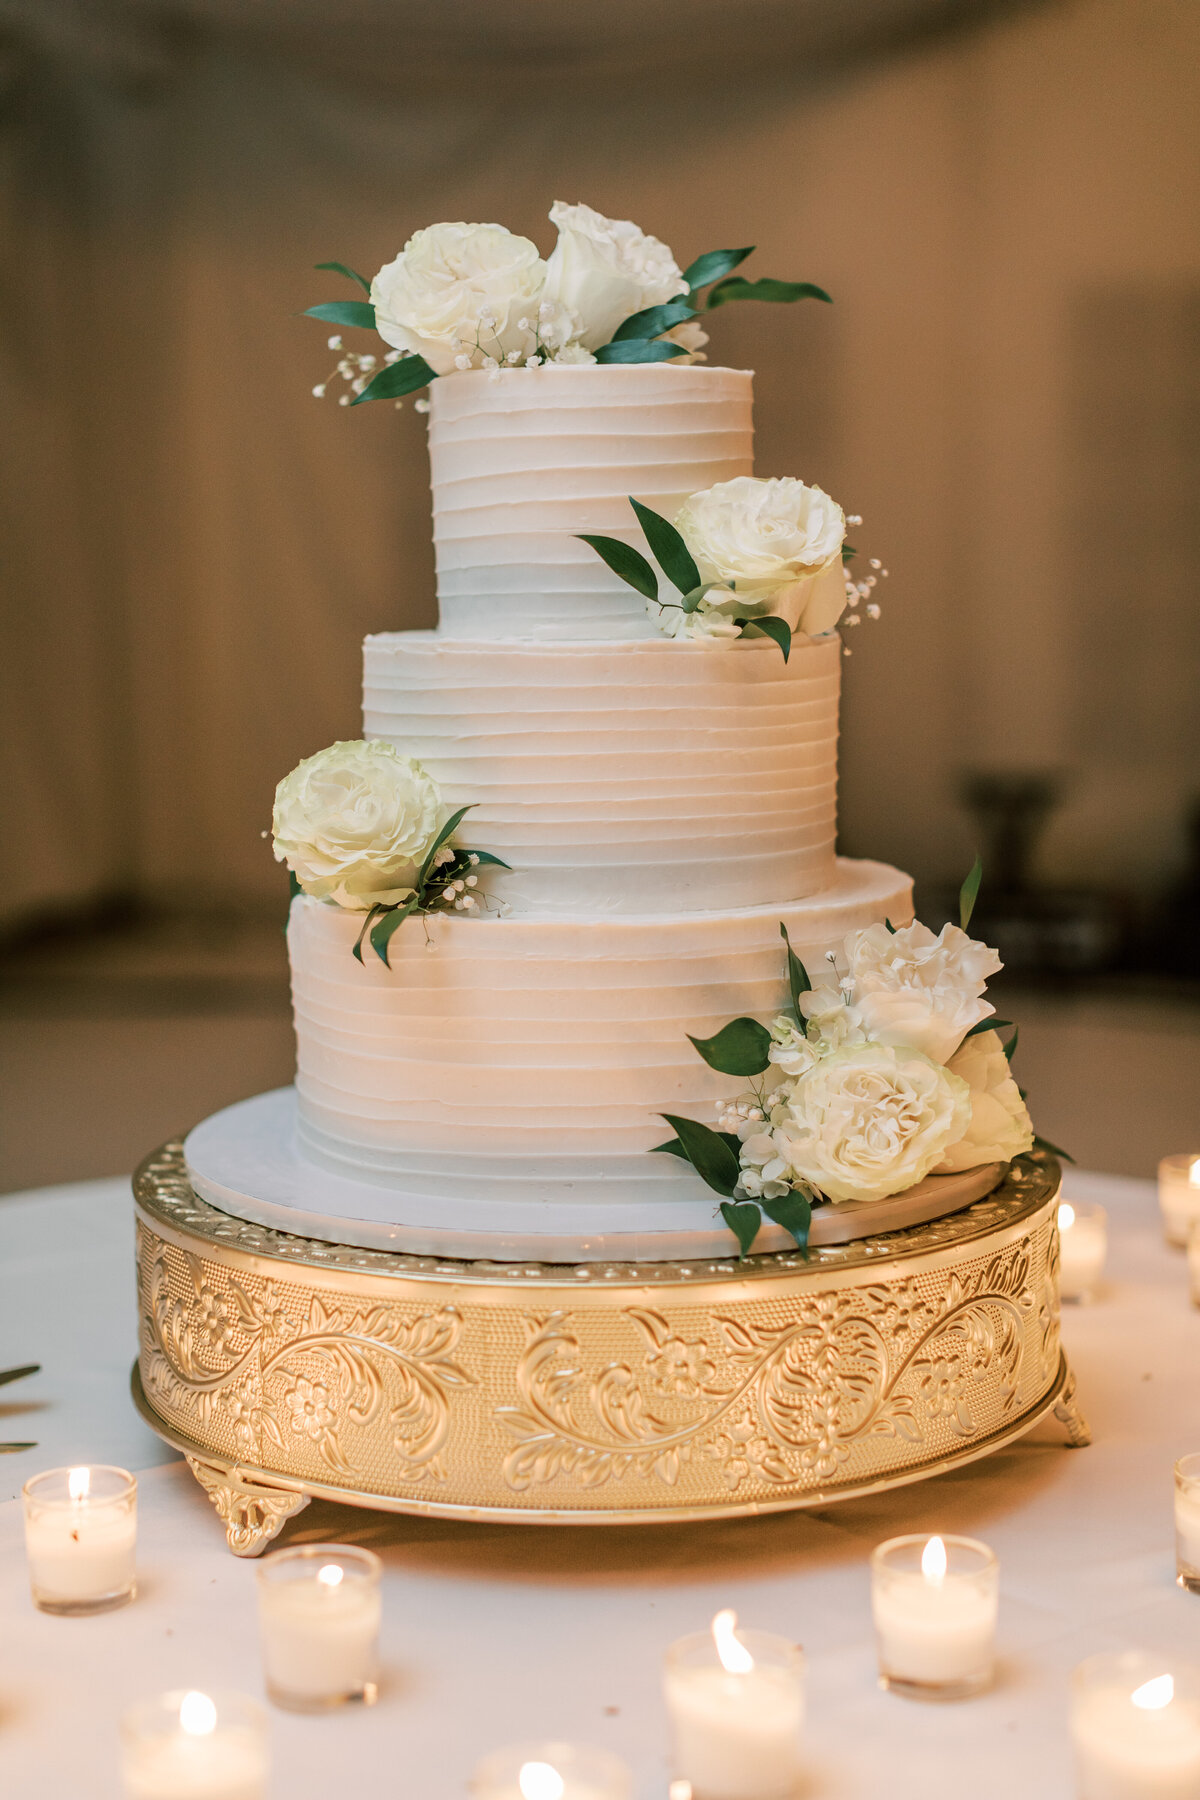 A wedding cake sits on a gold cake stand.